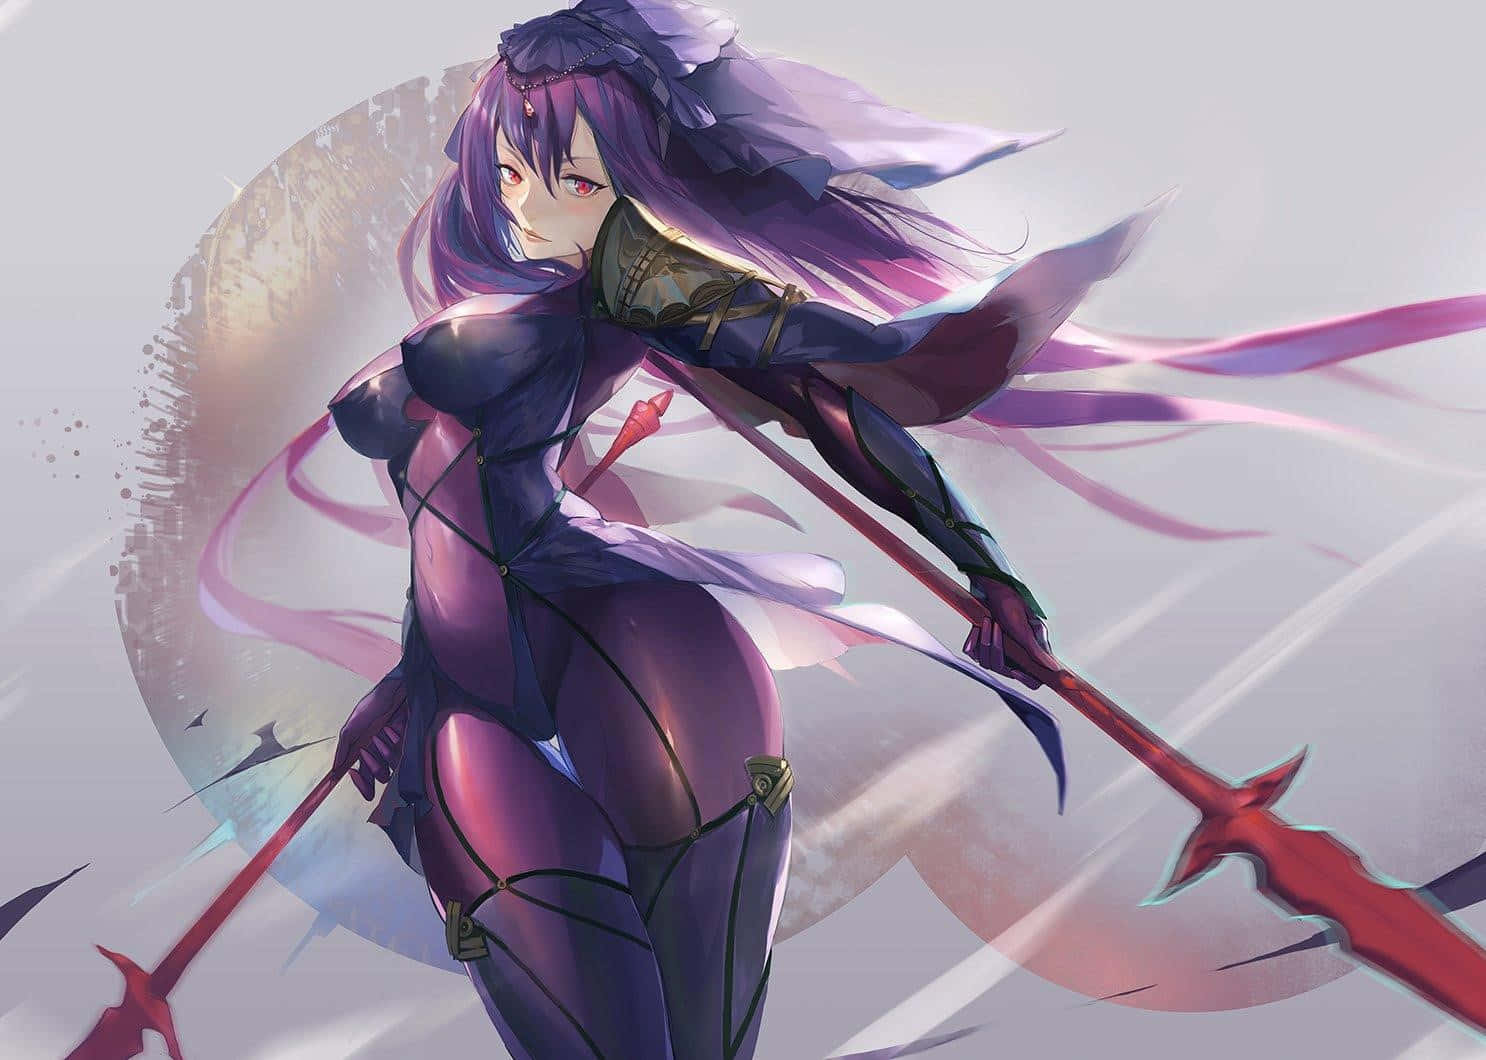 Scathach Skadi From Fate Grand Order In Majestic Pose Wallpaper